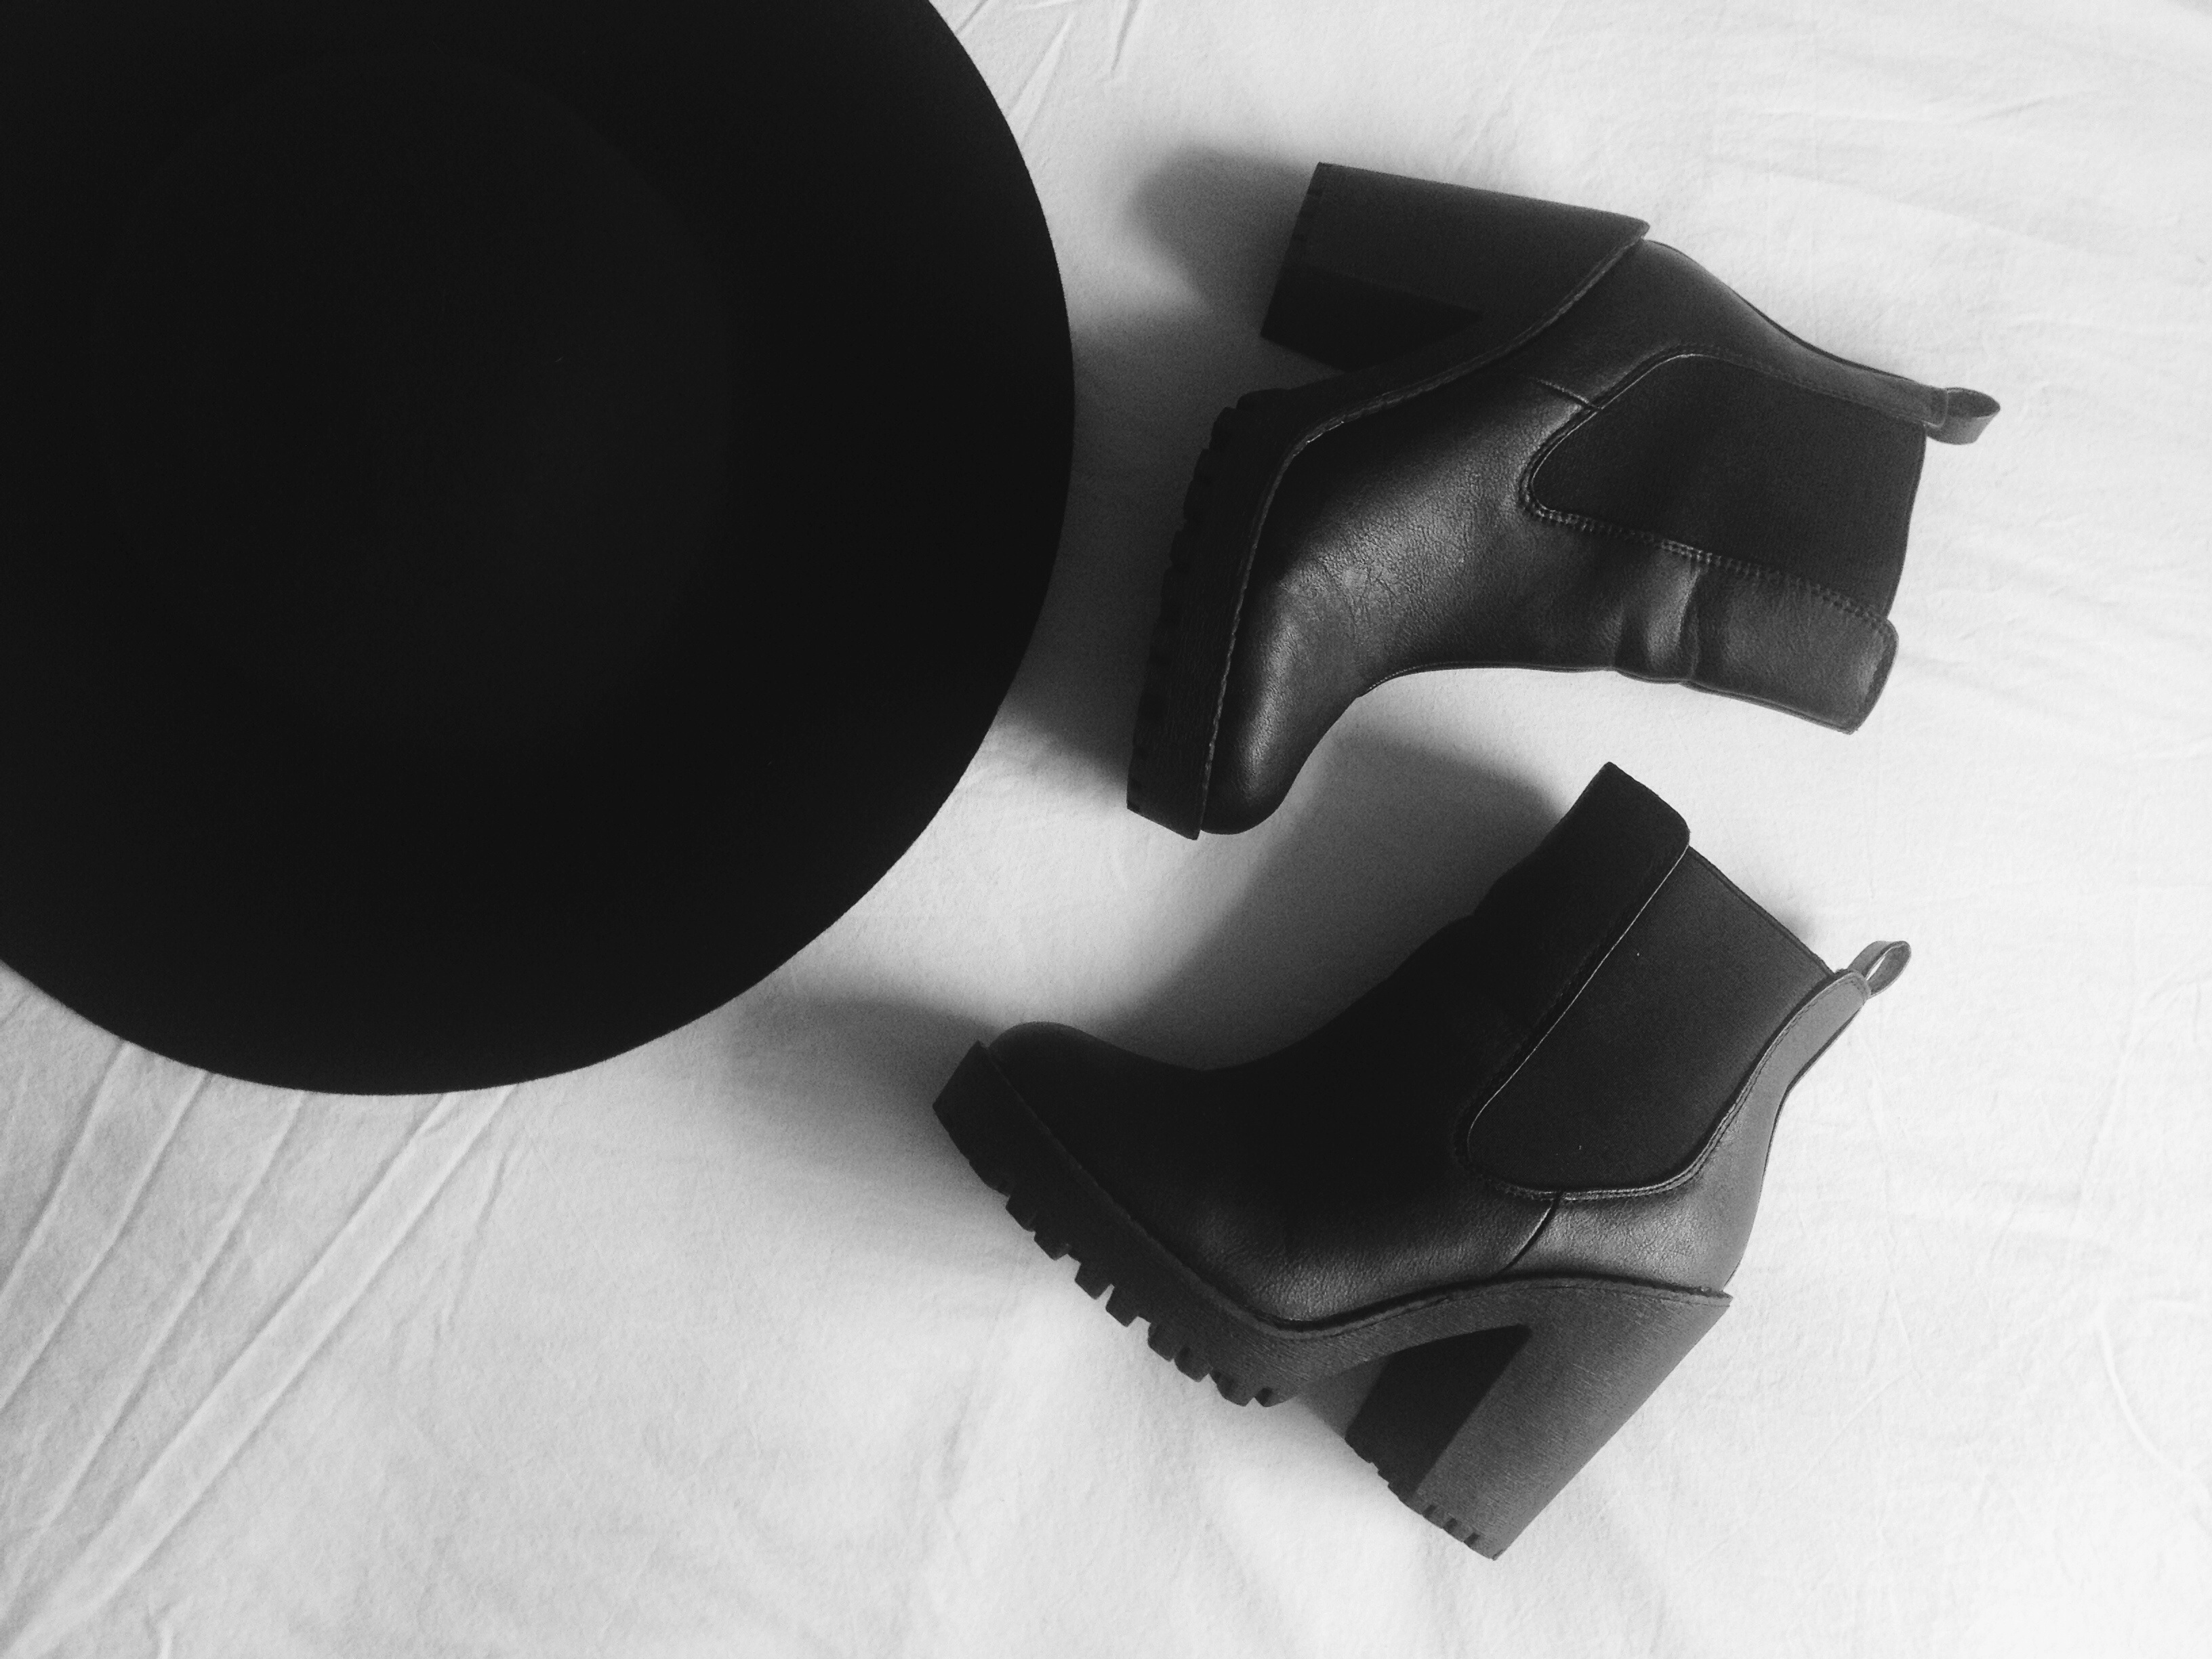 American apparel floppy hat chunky chelsea heel boots | A Living Diary